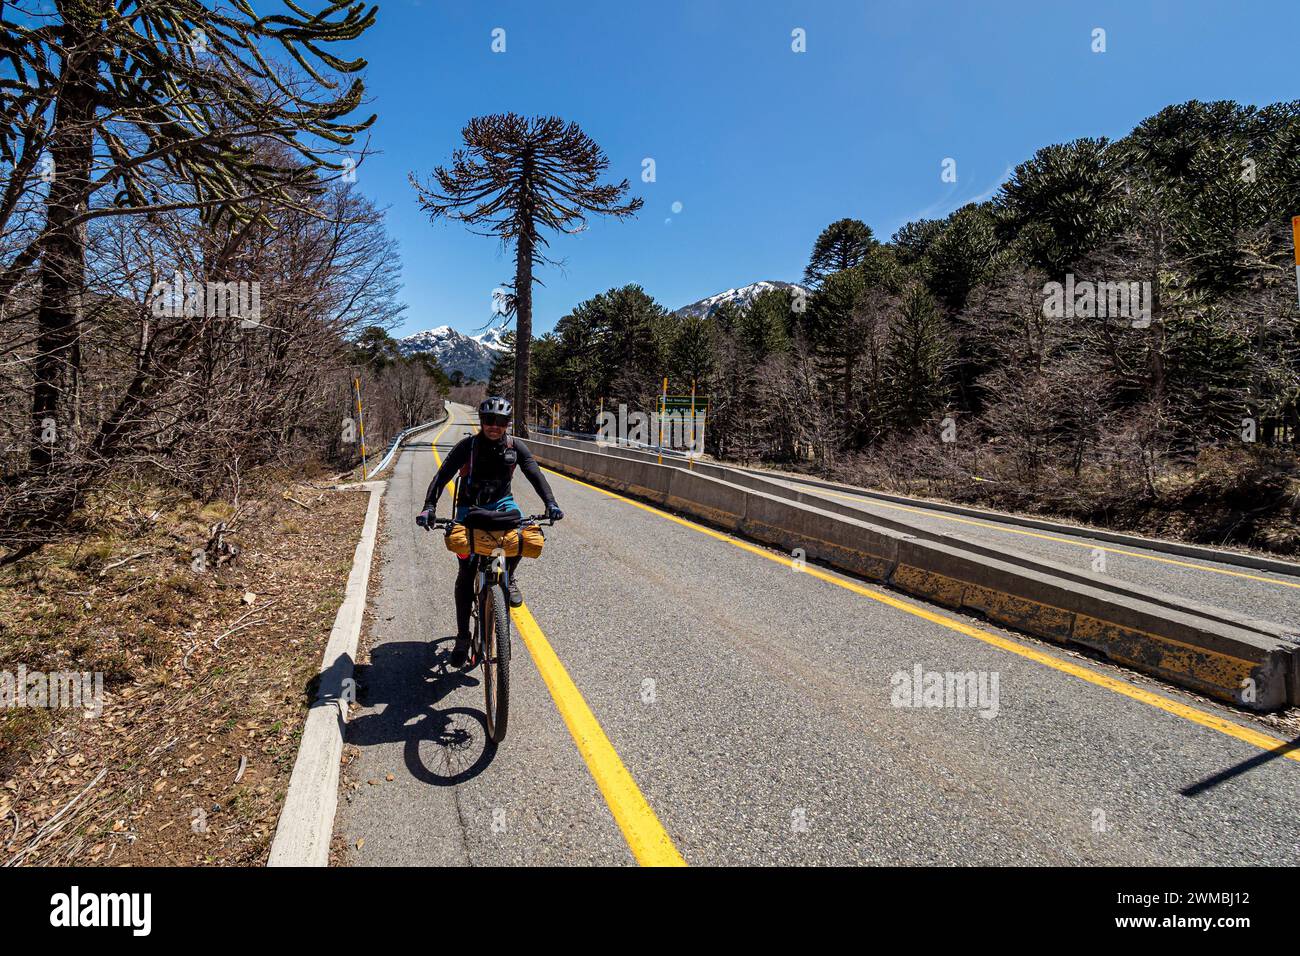 Araucaria forest, cyclist on a sunny day, single tree divides the road, west of Paso Tromen o Mamuil Malal, Villarica National Park, Chile Stock Photo